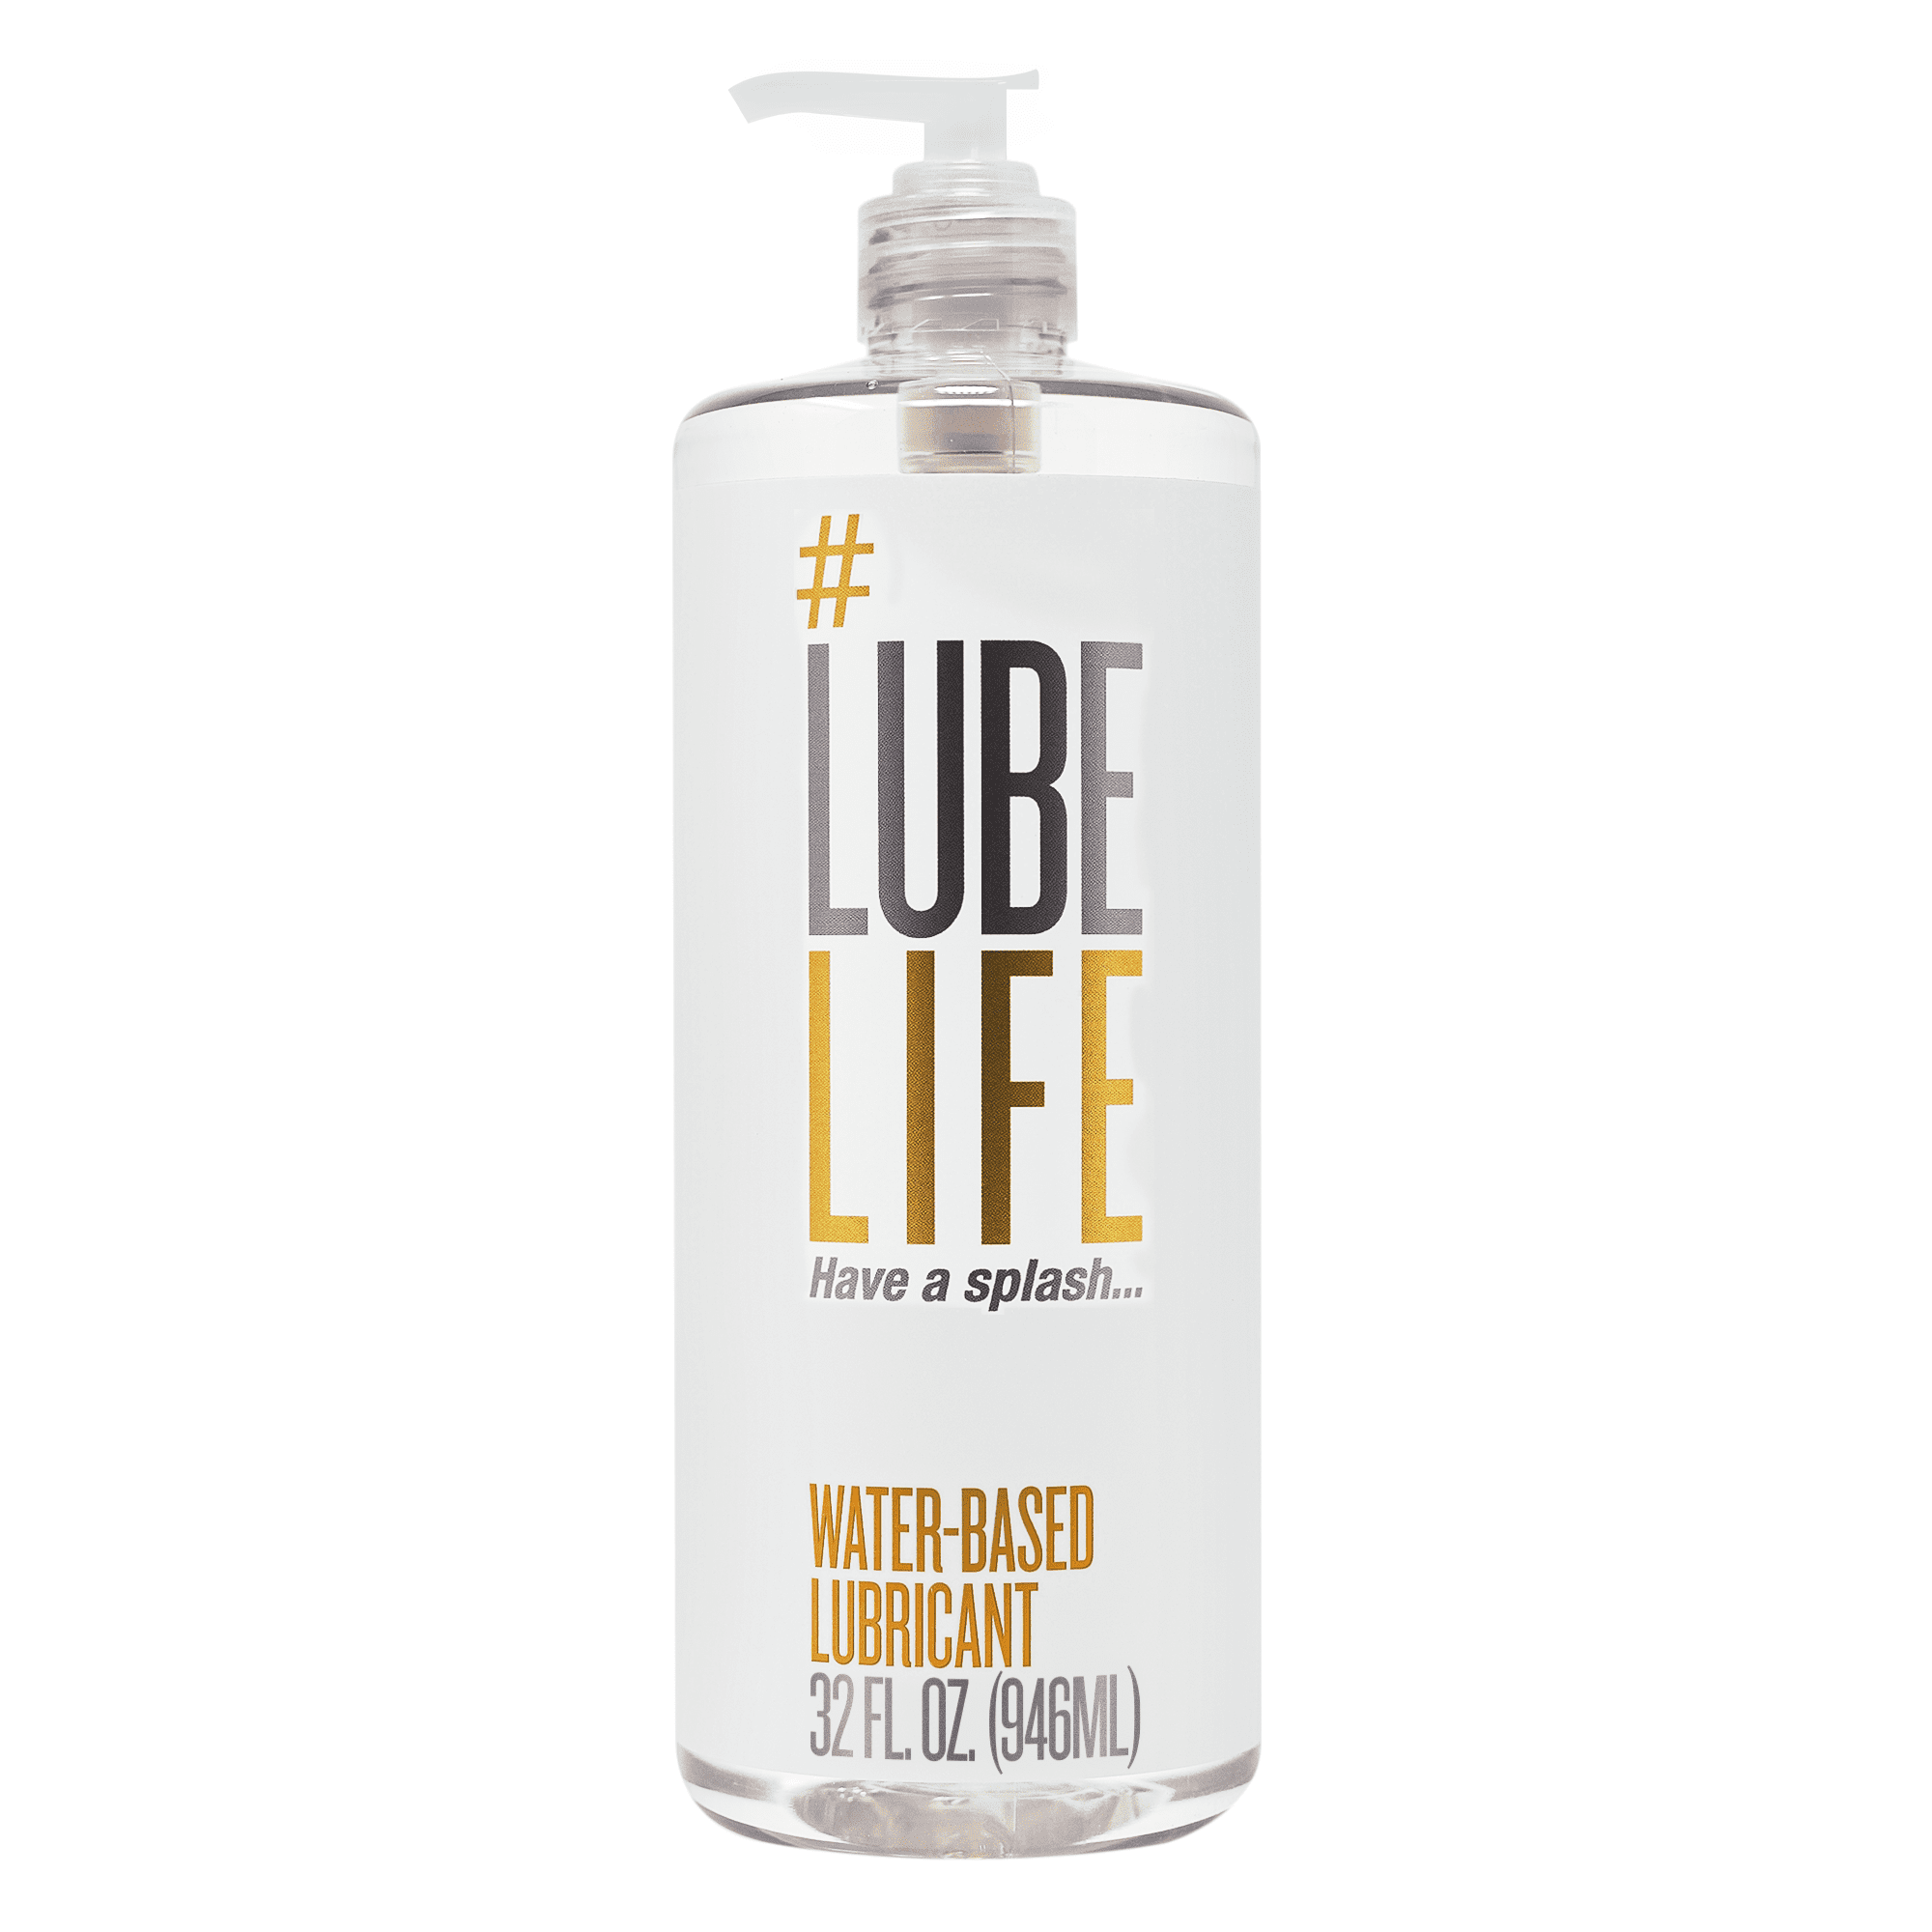 Lube Life Sensations Kit, Water-based Warming And Cooling Lubes